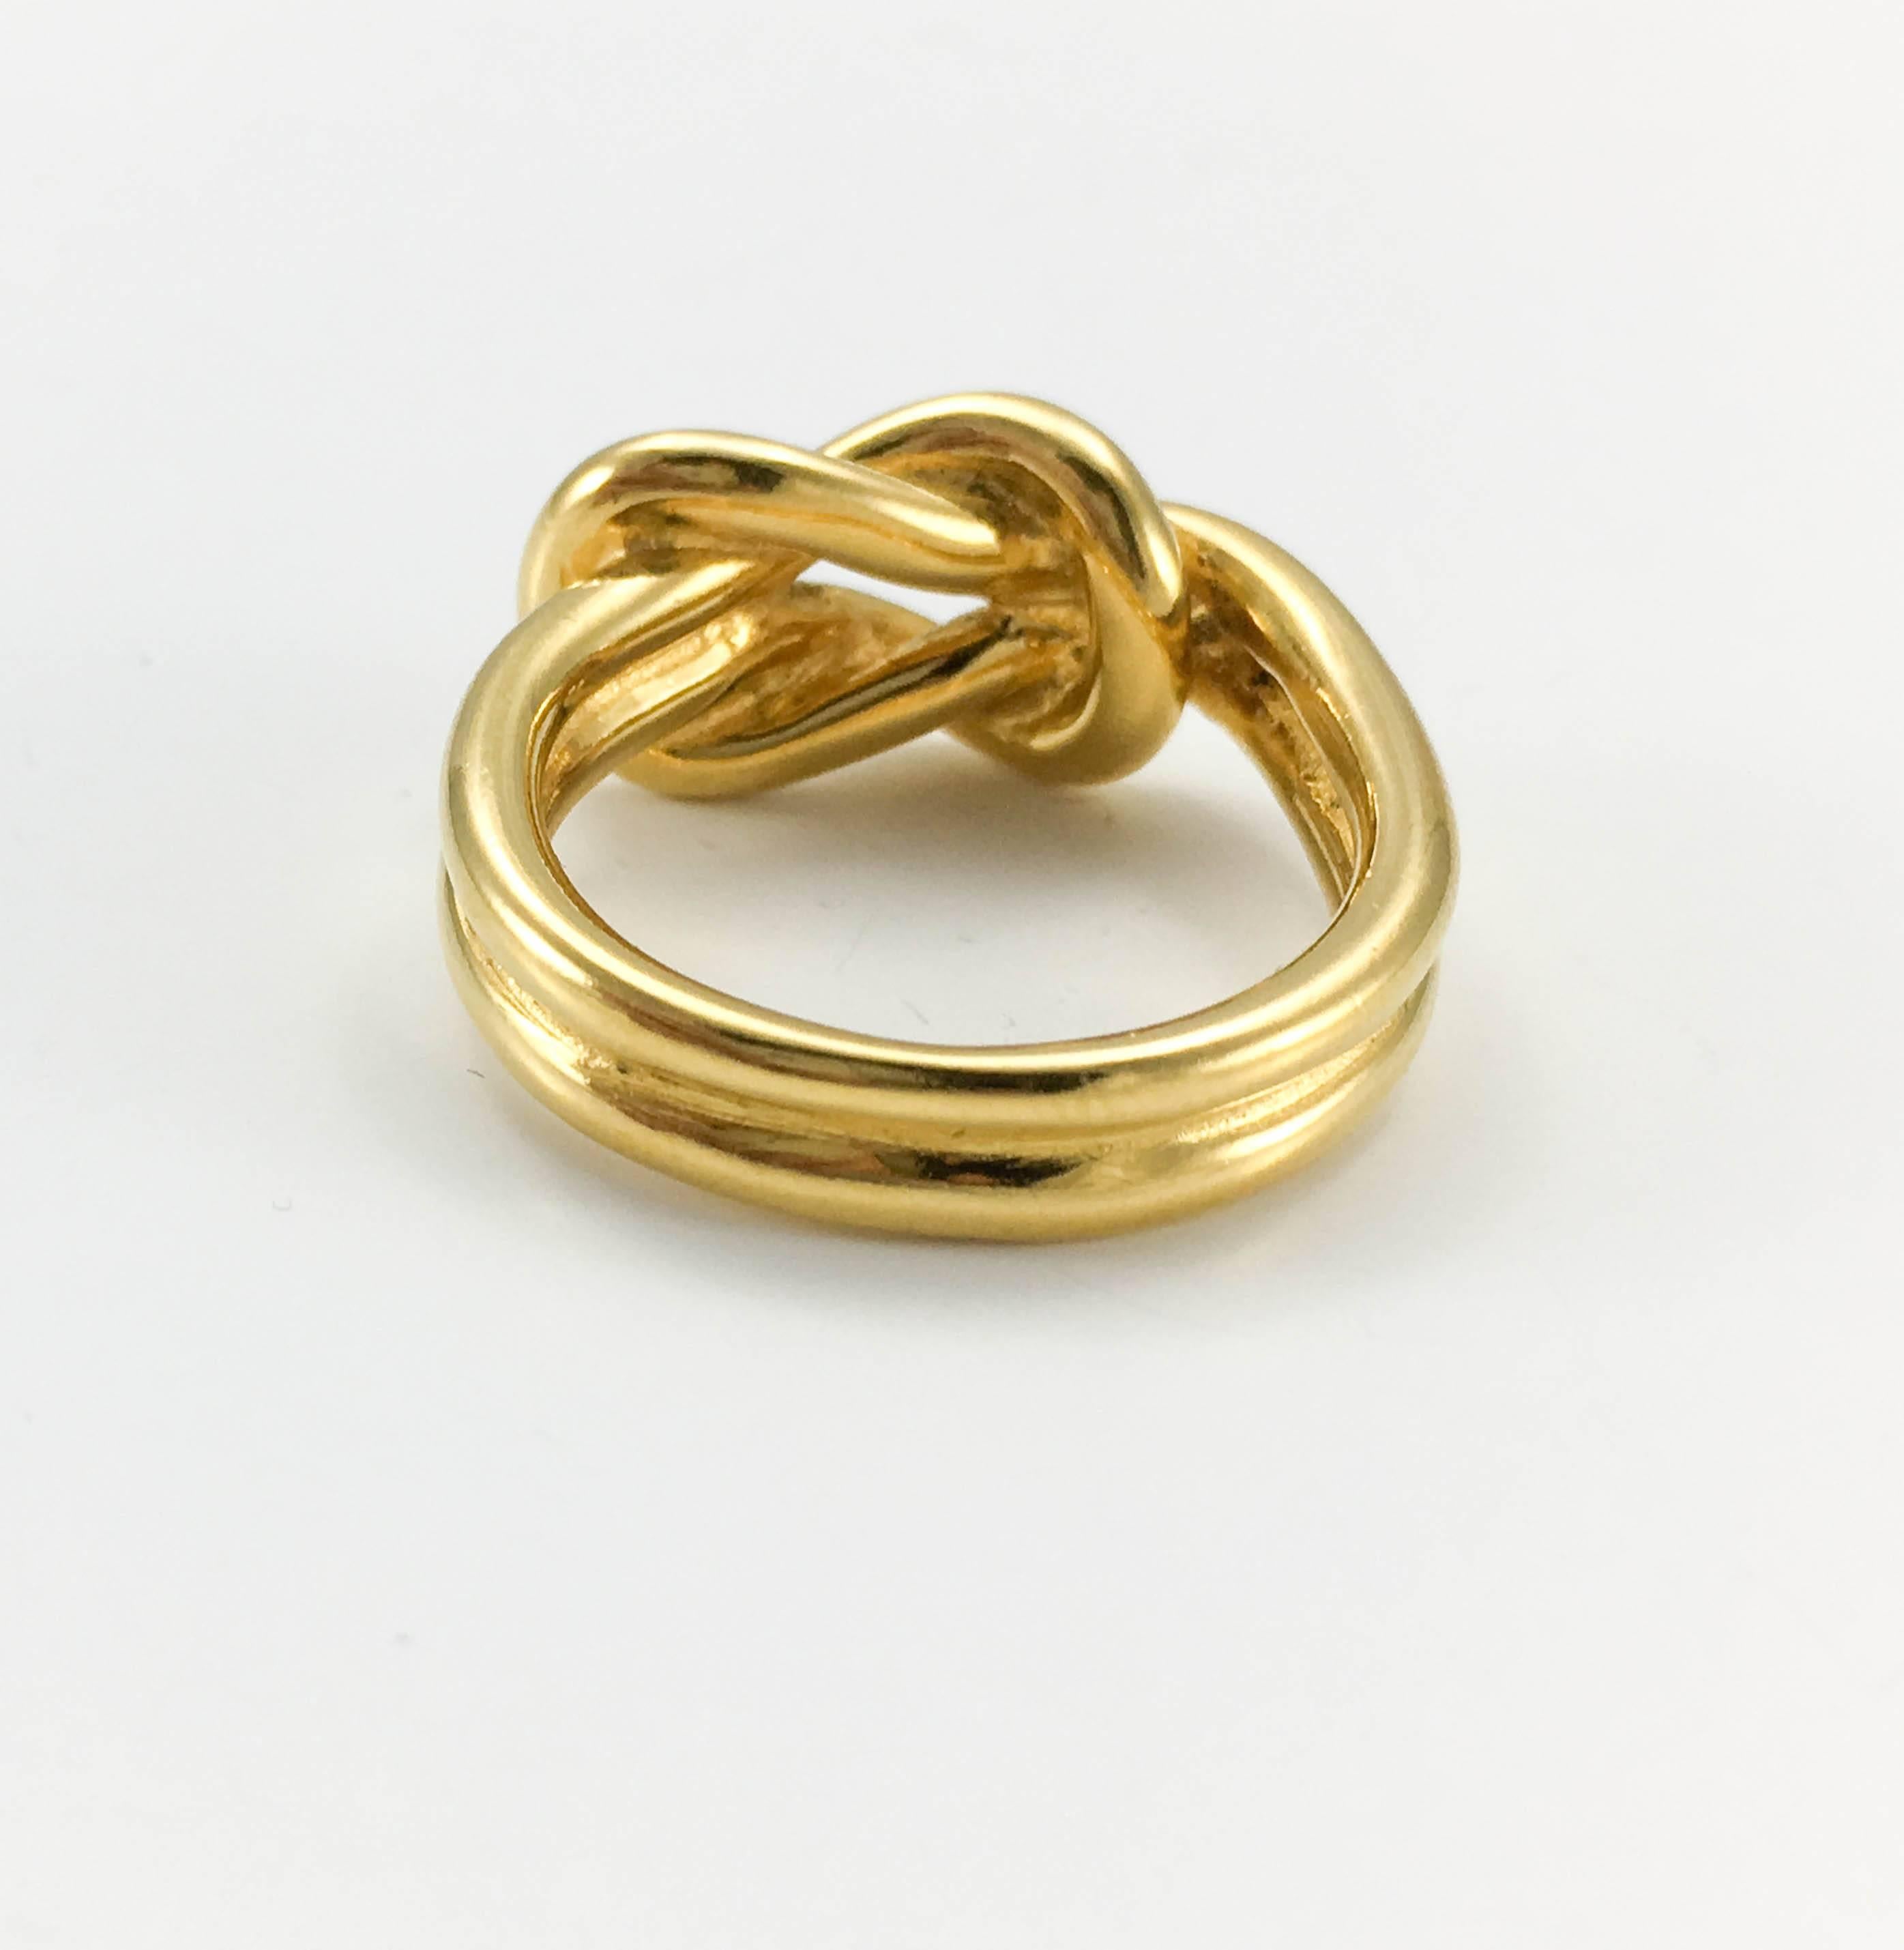 Hermes Gold-Tone 'Knotted' Scarf Ring In Excellent Condition In London, Chelsea